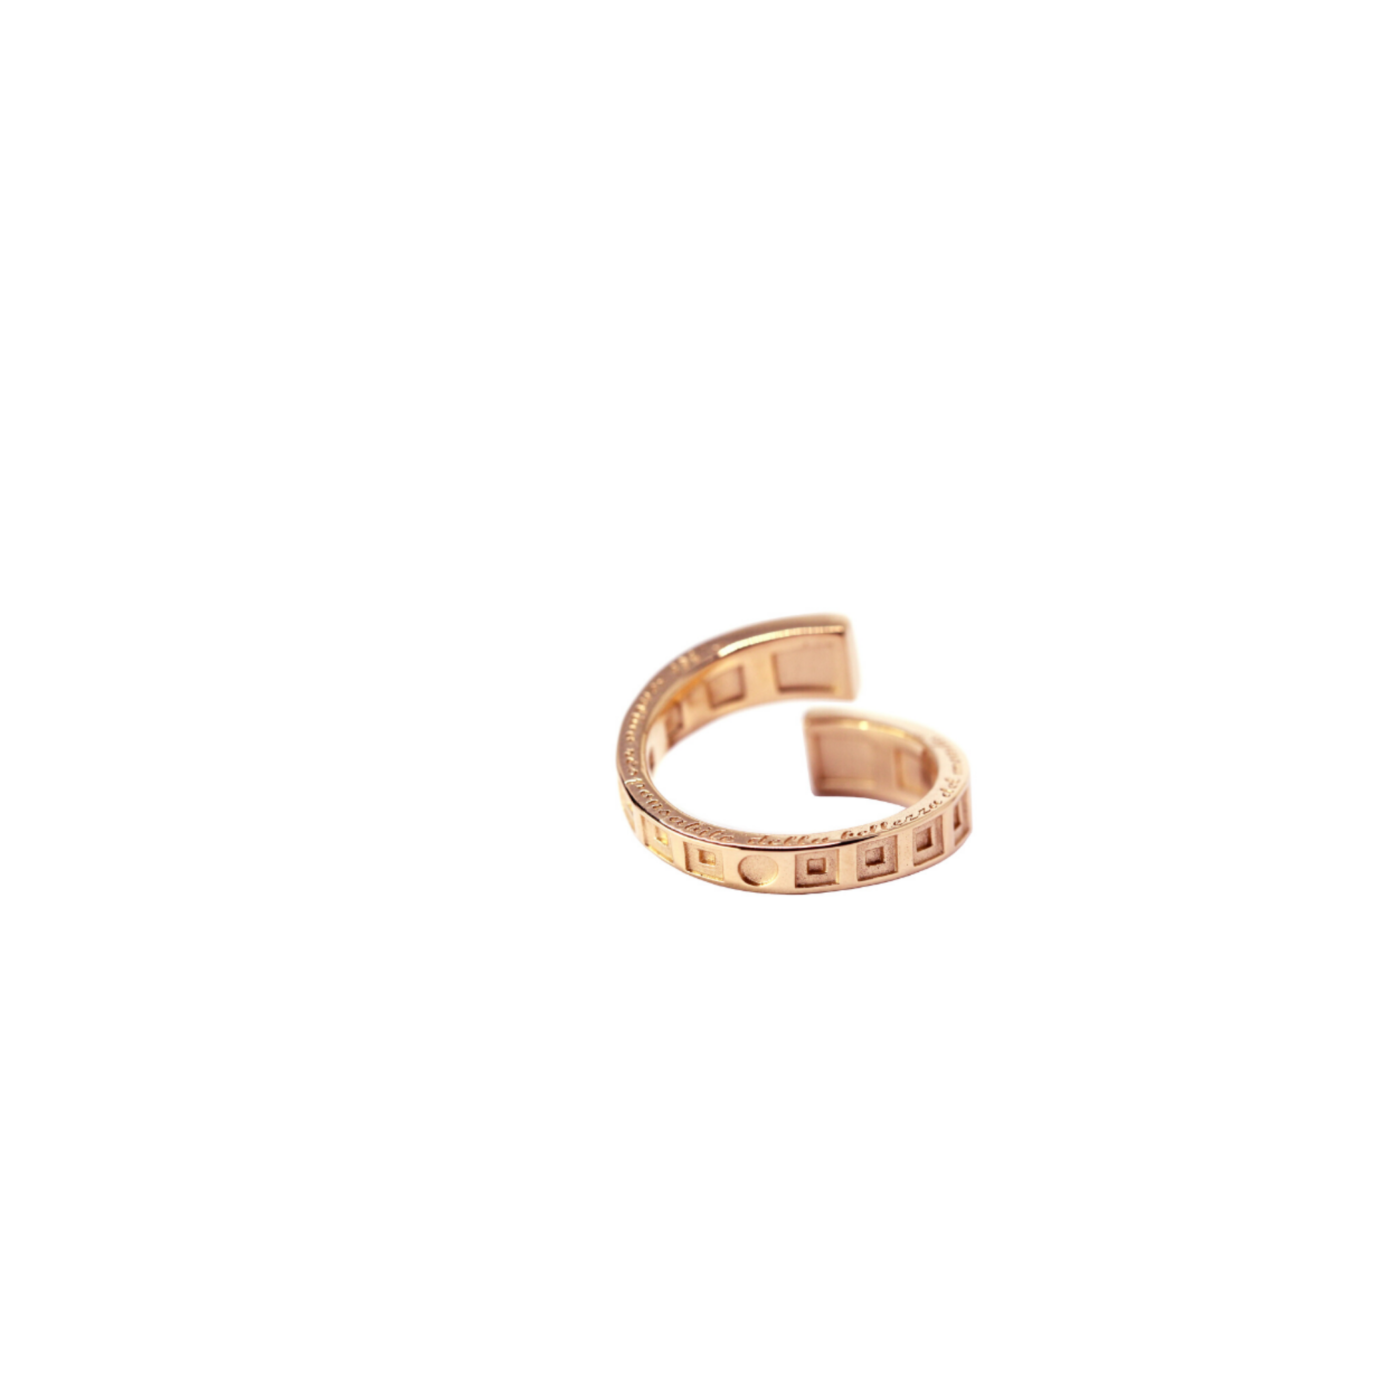 Pantheon Ring Rose Gold Plated Silver | Architecture-à-porter